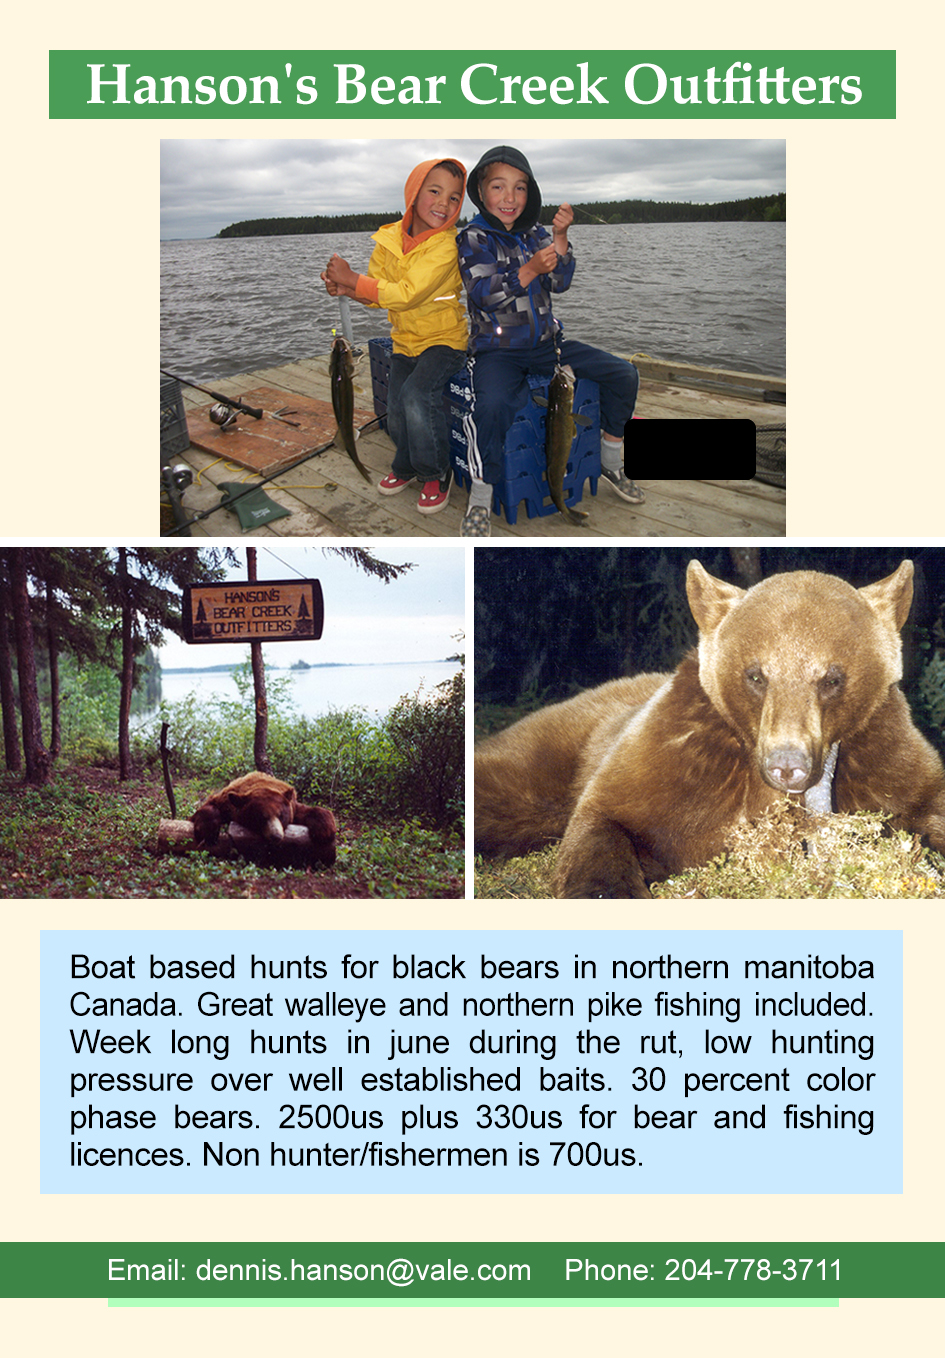 Hanson's Bear Creek Outfitters